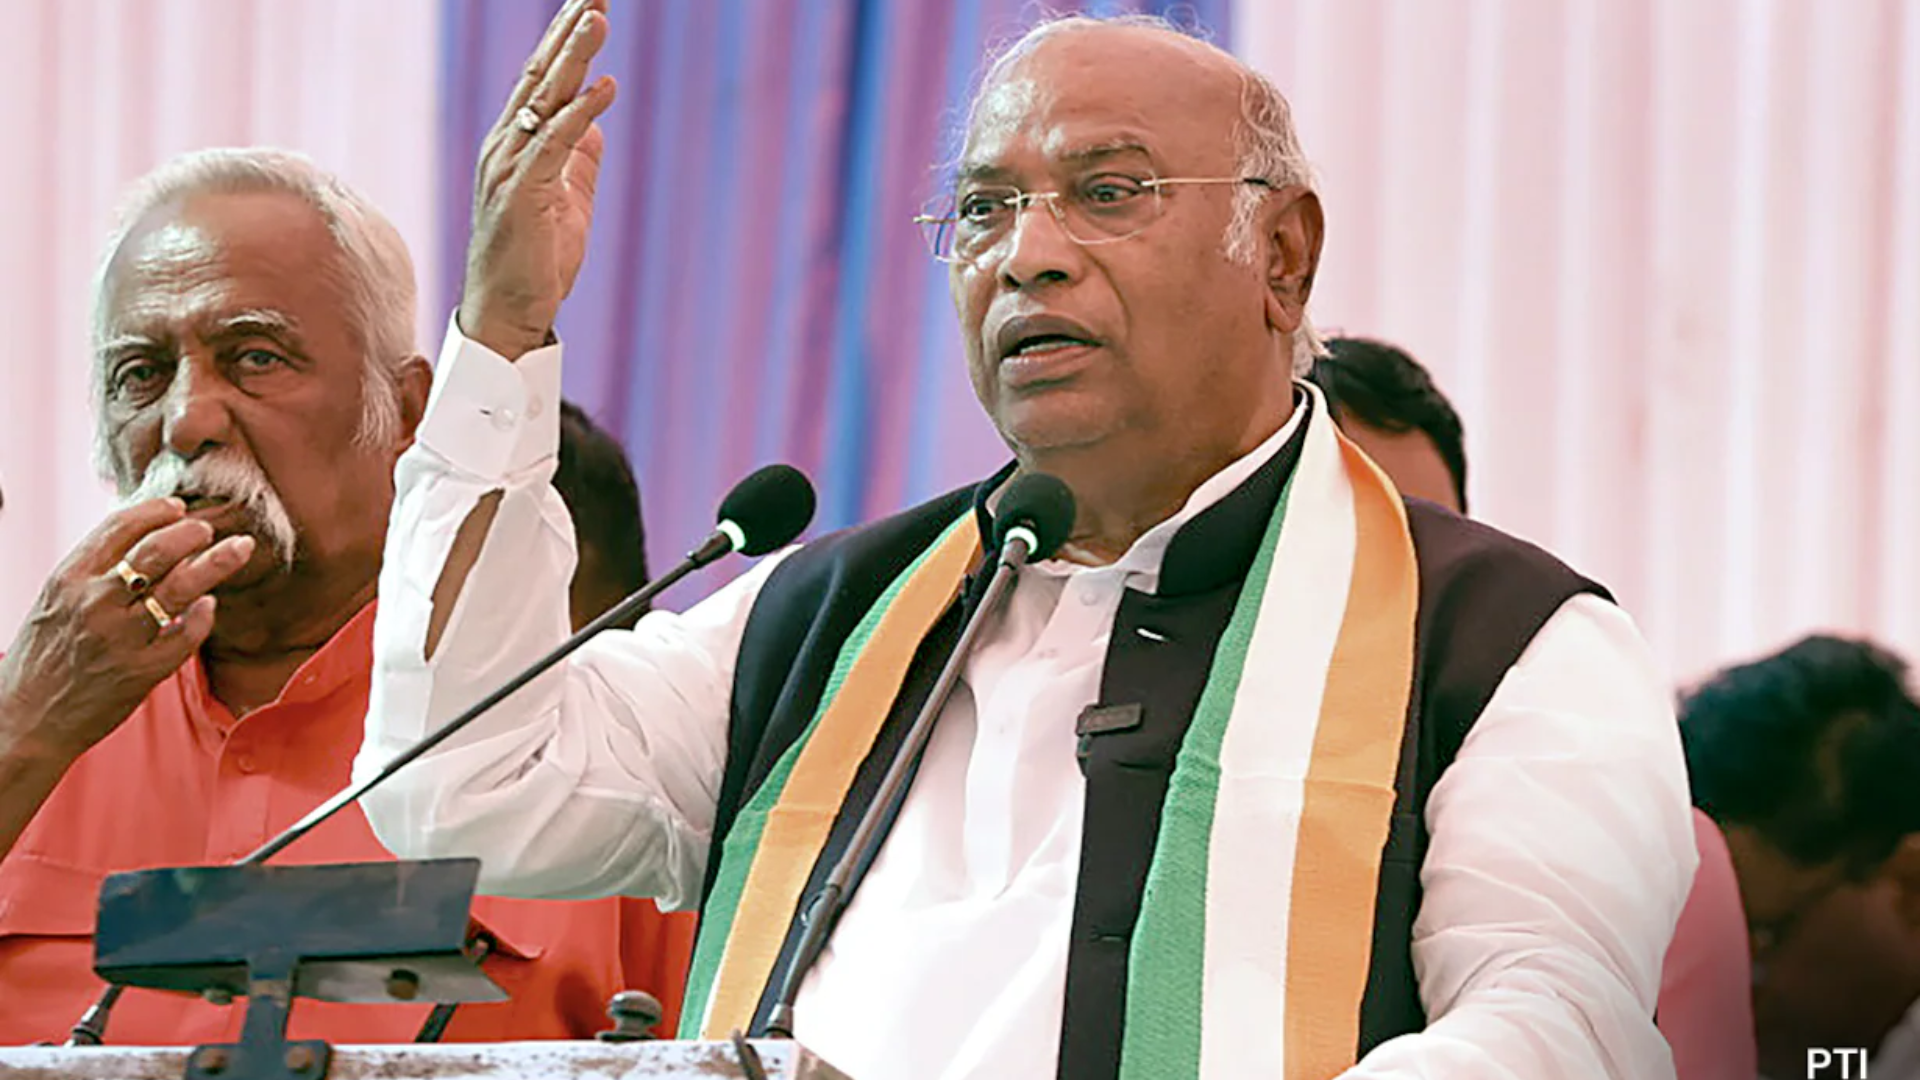 Kharge Clarifies Amid BJP Criticism, Says ‘Did not intend to hurt sentiments’